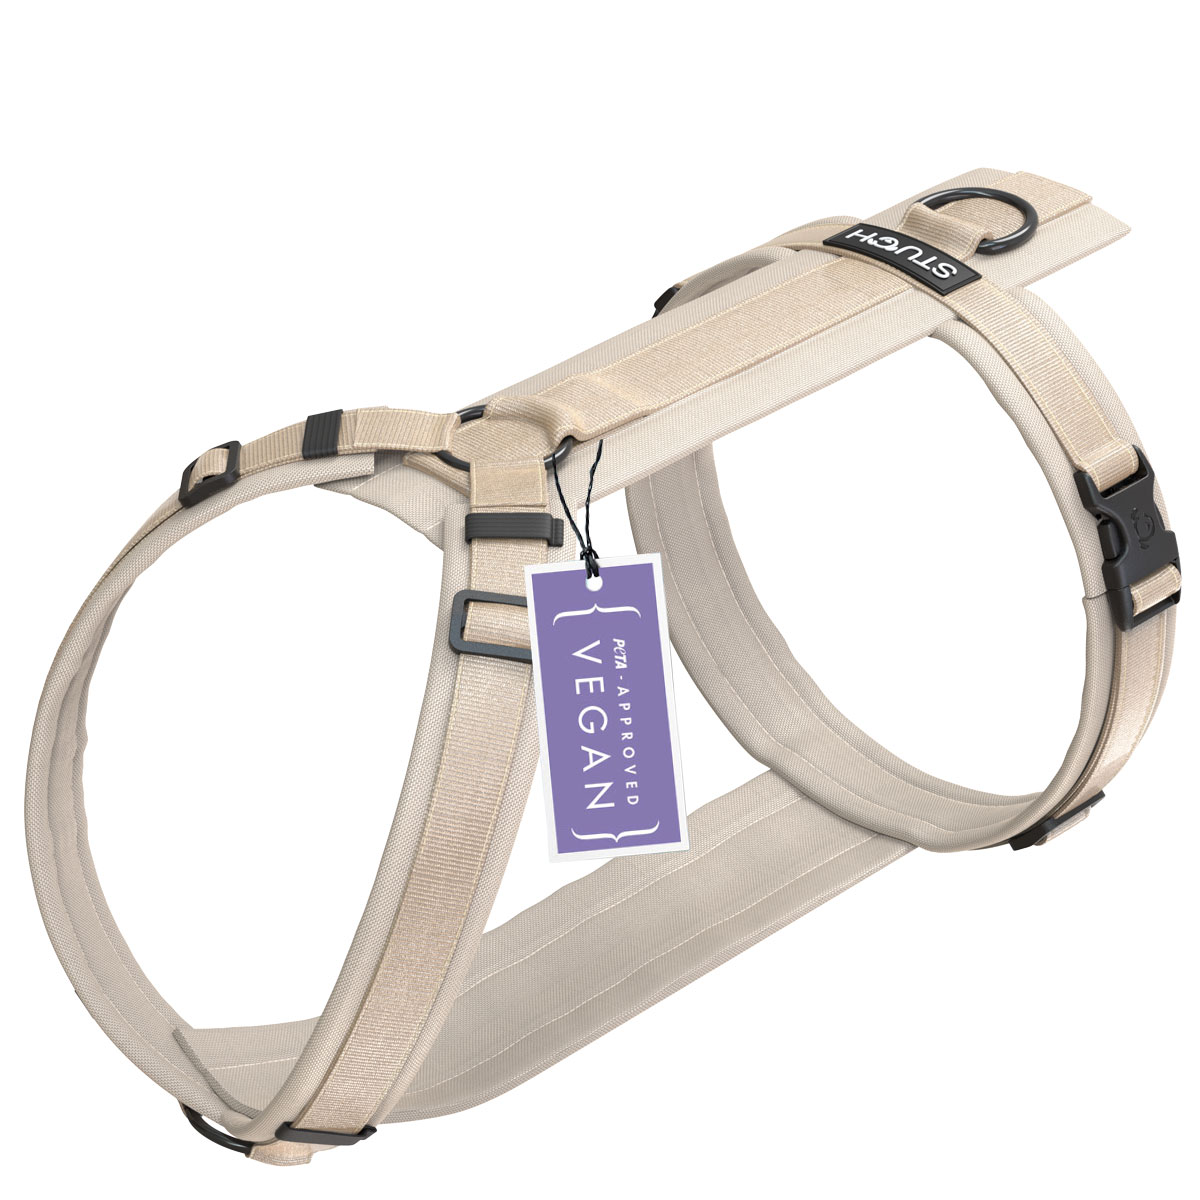 a dog harness with a tag